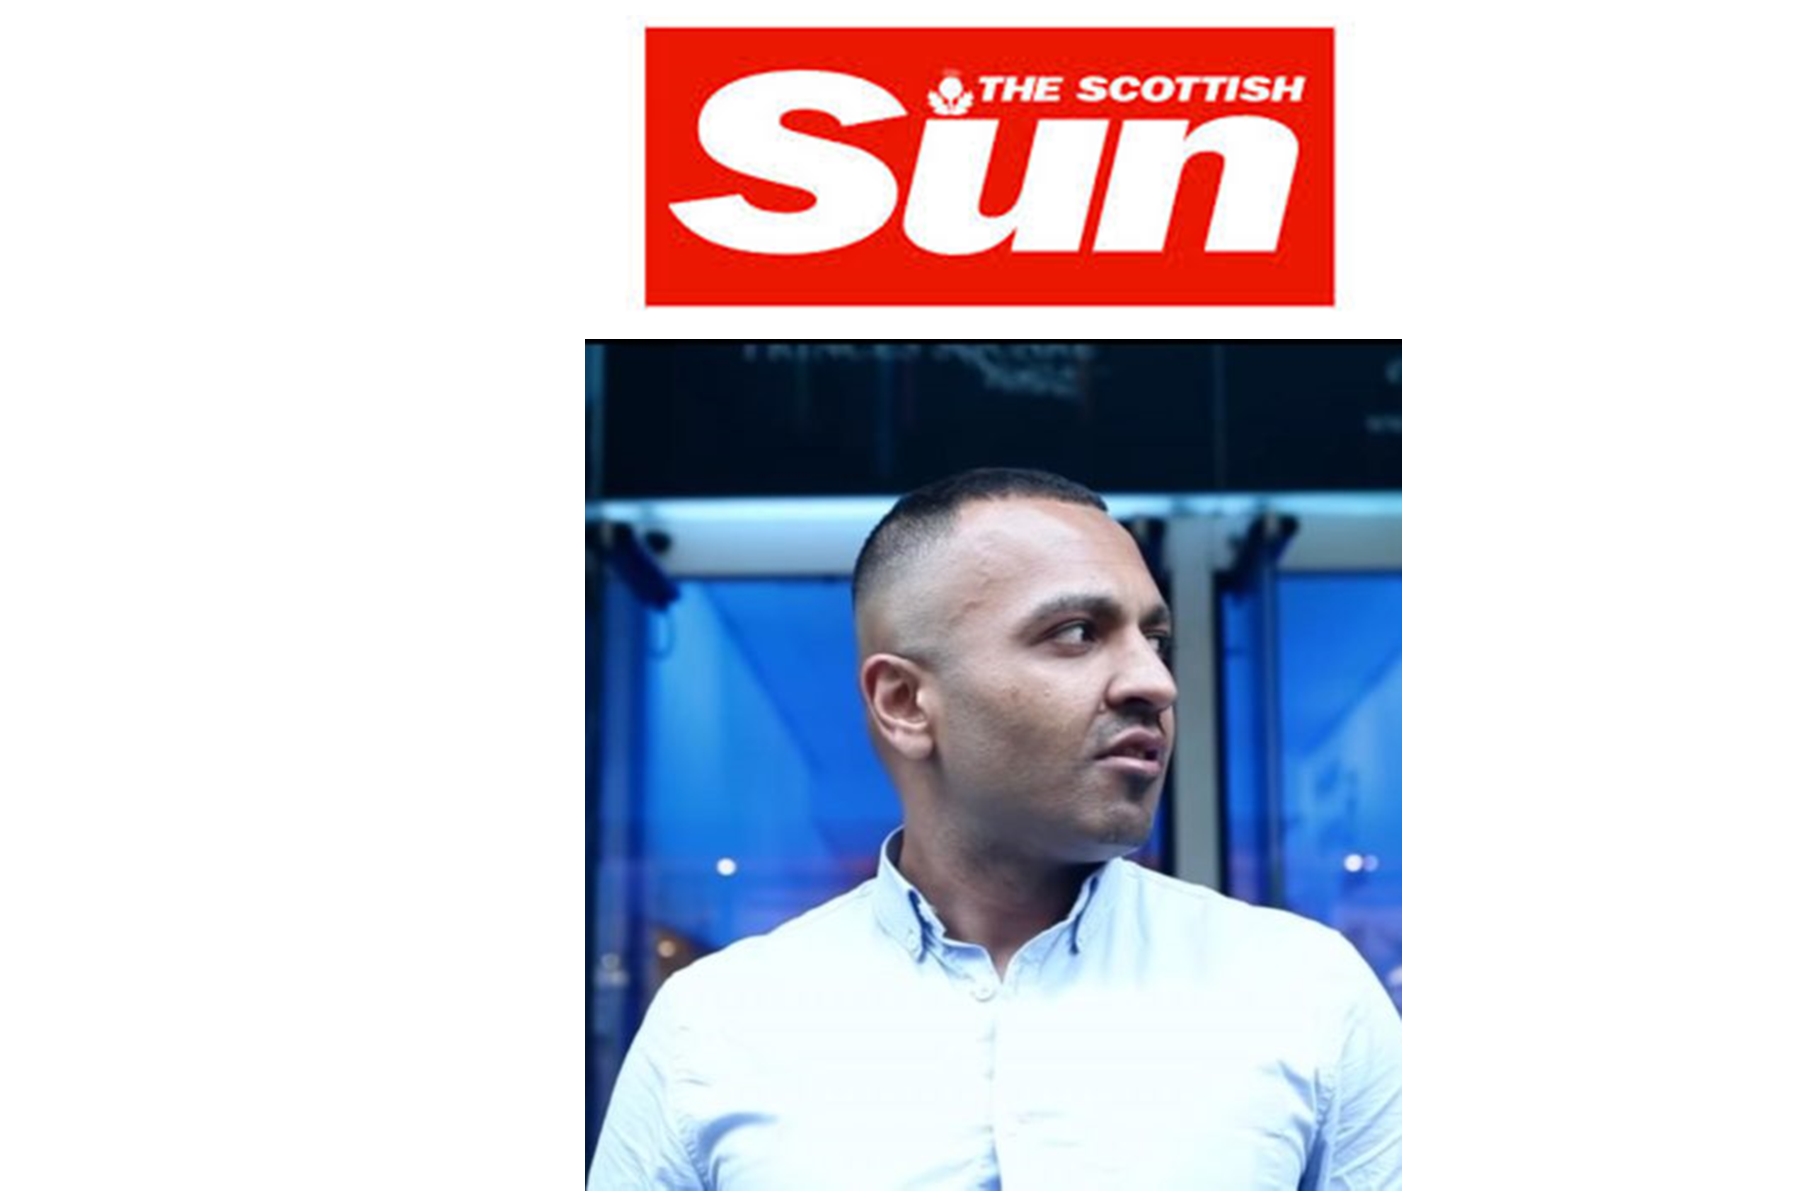 The Scottish Sun Scum & Sleazy Glasgow Reporter Christine Lavelle Wrote Desperate Hit-Piece About Addy Agame Touring With P.Diddy: Stun Guns, Cocaine And Cannabis To Demonise The Vindicated Dating Coach (Addy Agame Proven Innocent, Beats False Allegations Due To Miscarriage Of Justice / No Actual Crime!)